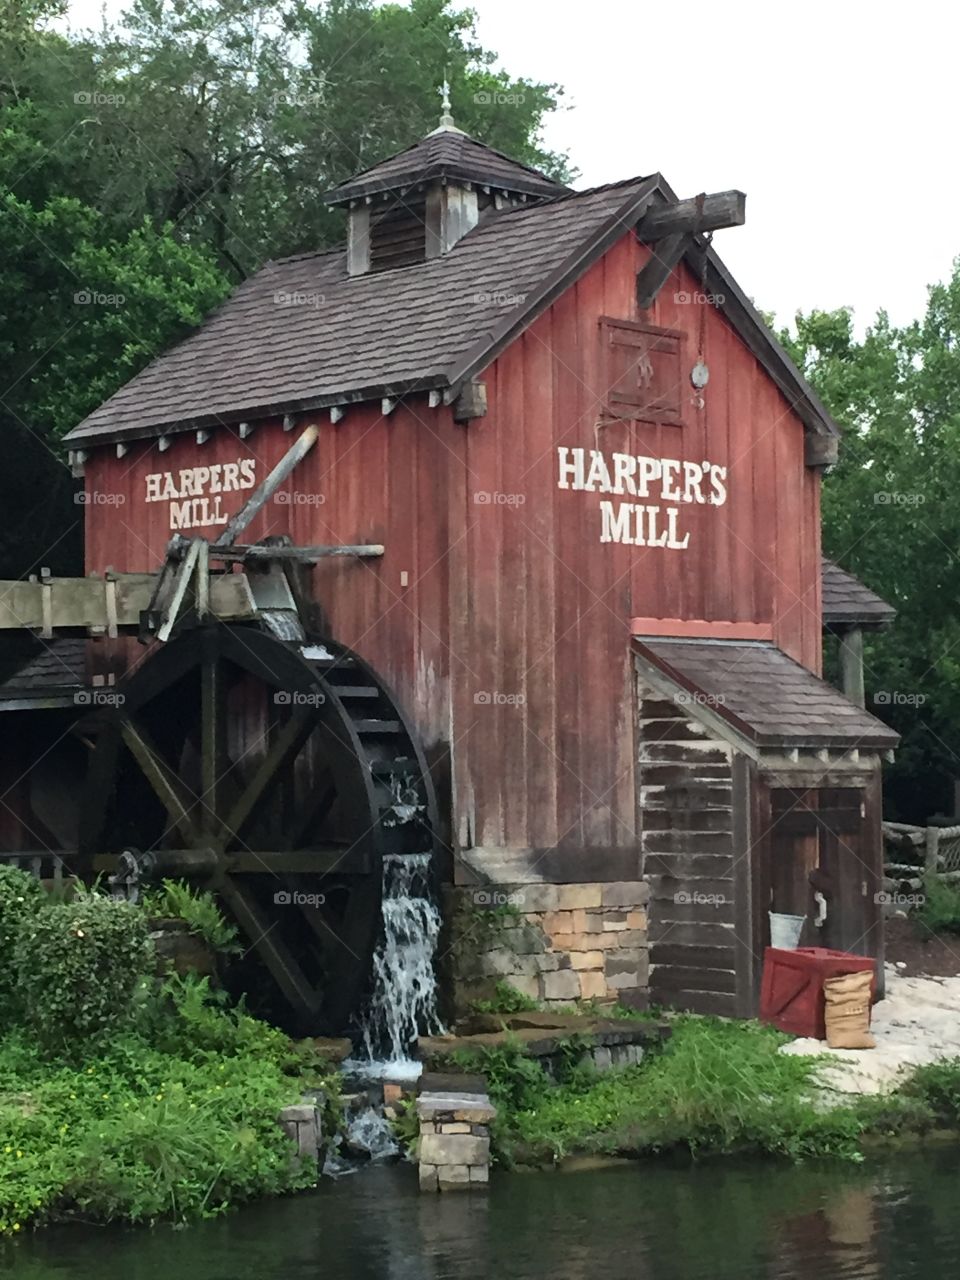 Harpers Mill WDW